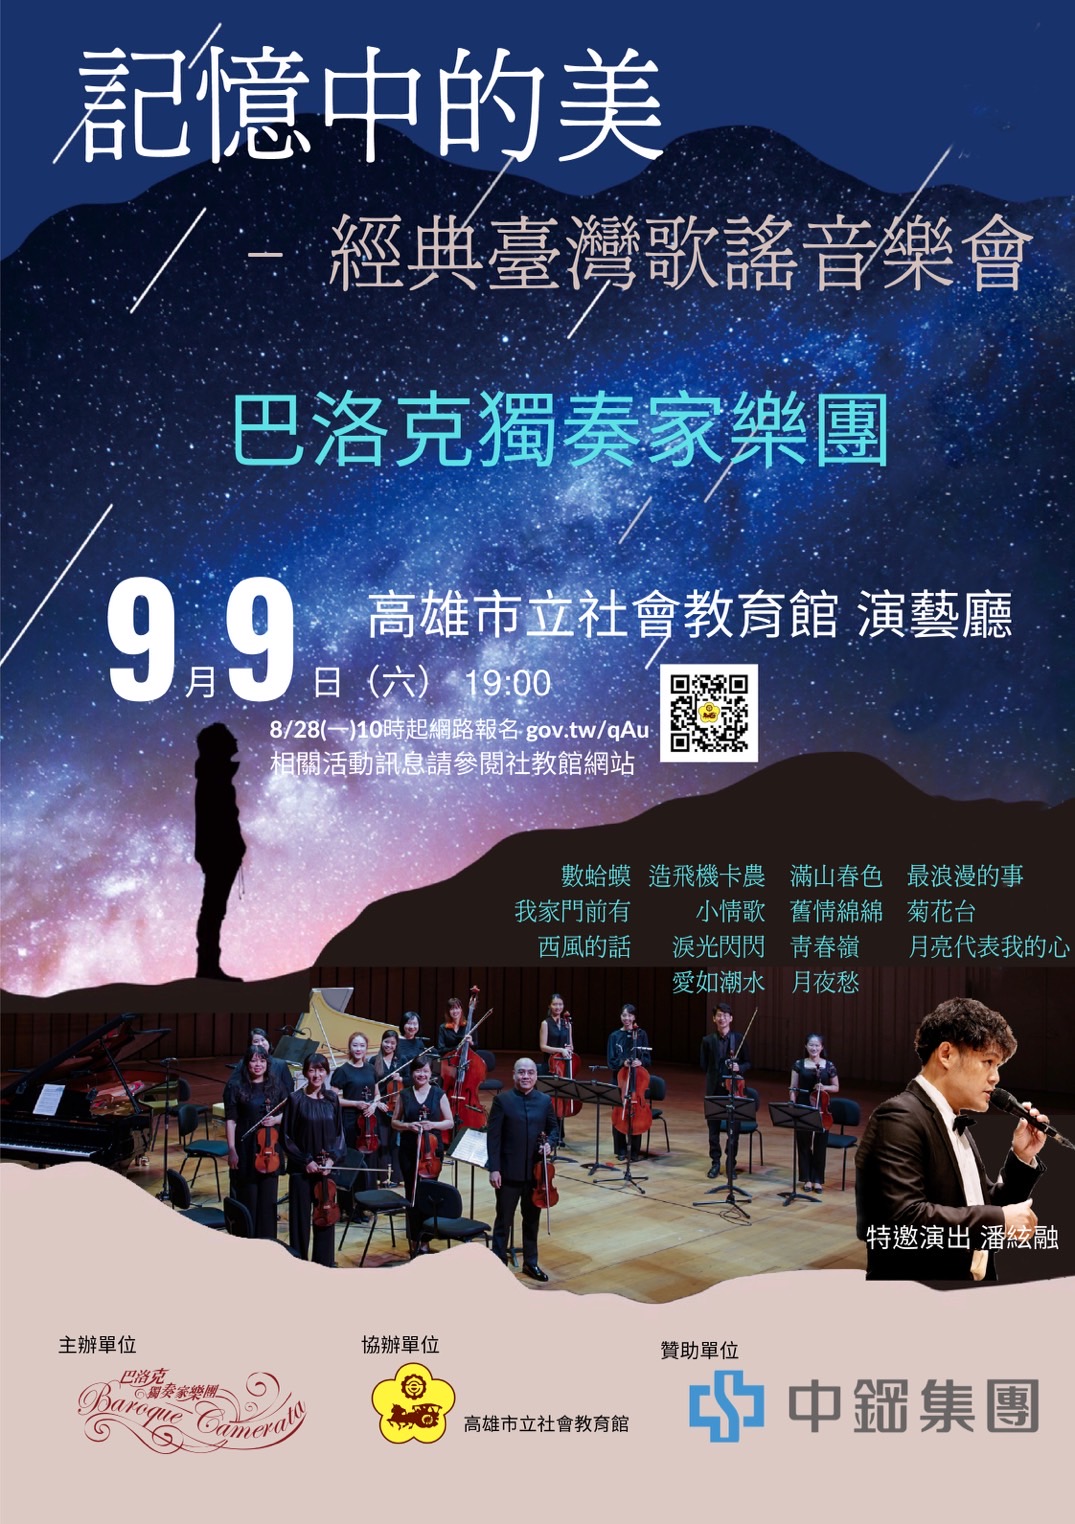 Beauty in Memory-Classic Taiwanese Folks Concert